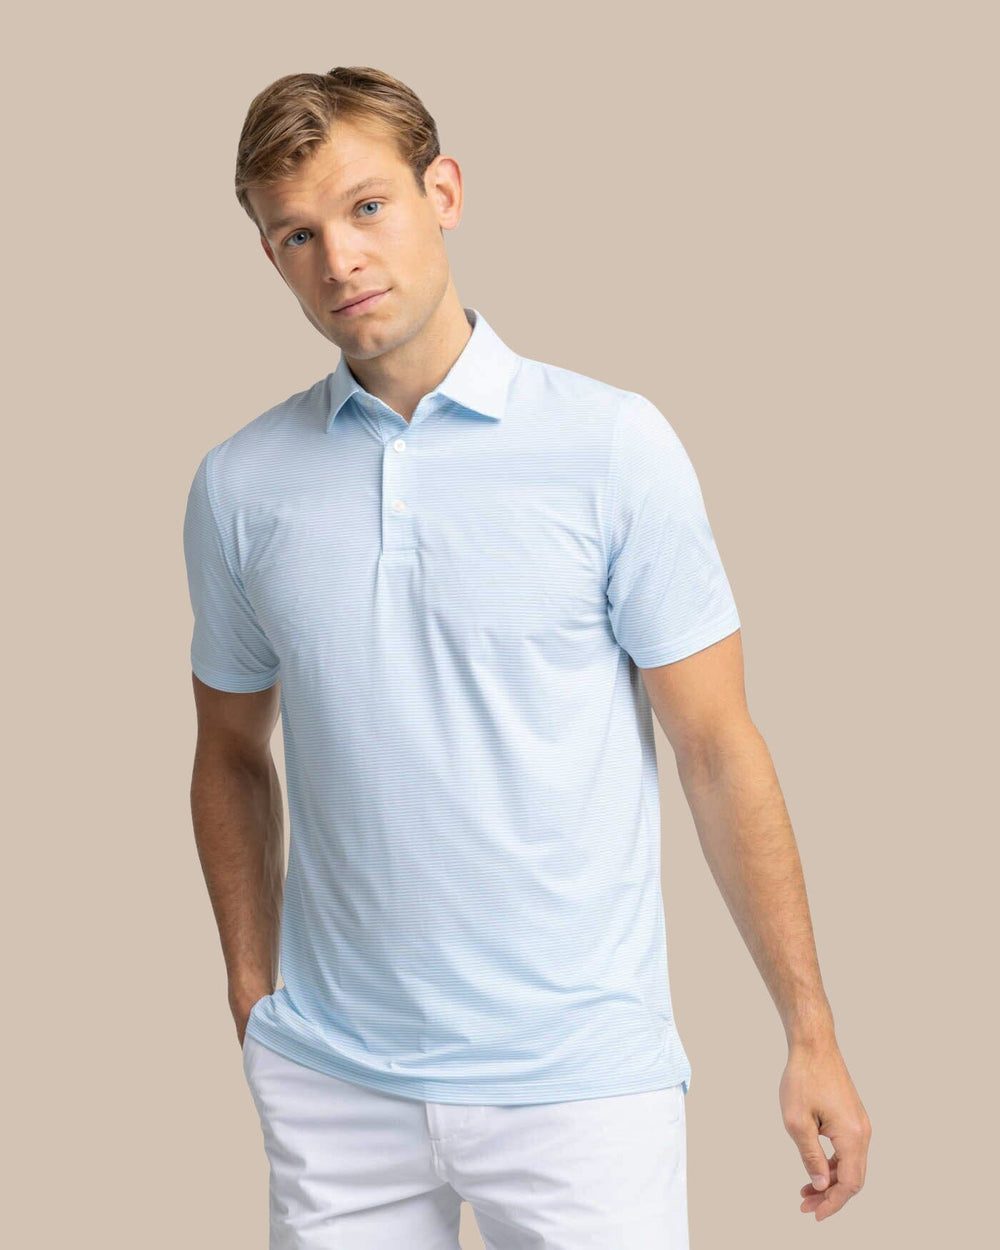 The front view of the Southern Tide brrr-eeze Meadowbrook Stripe Polo by Southern Tide - Clearwater Blue